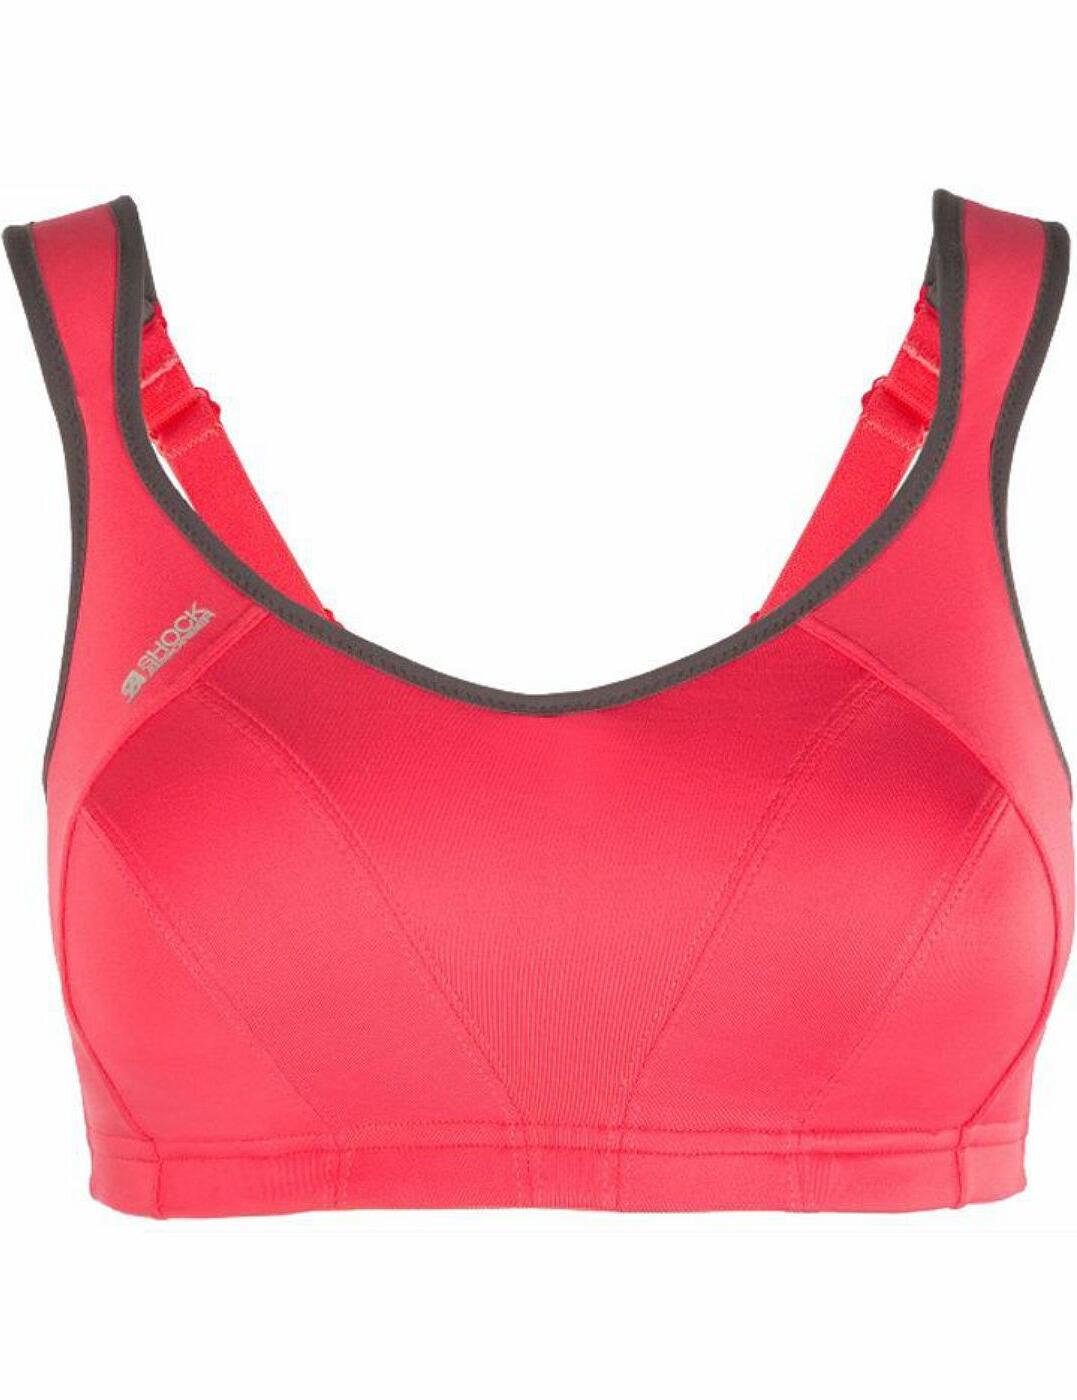 S4490 Shock Absorber Active Sports Bra - S4490 Red